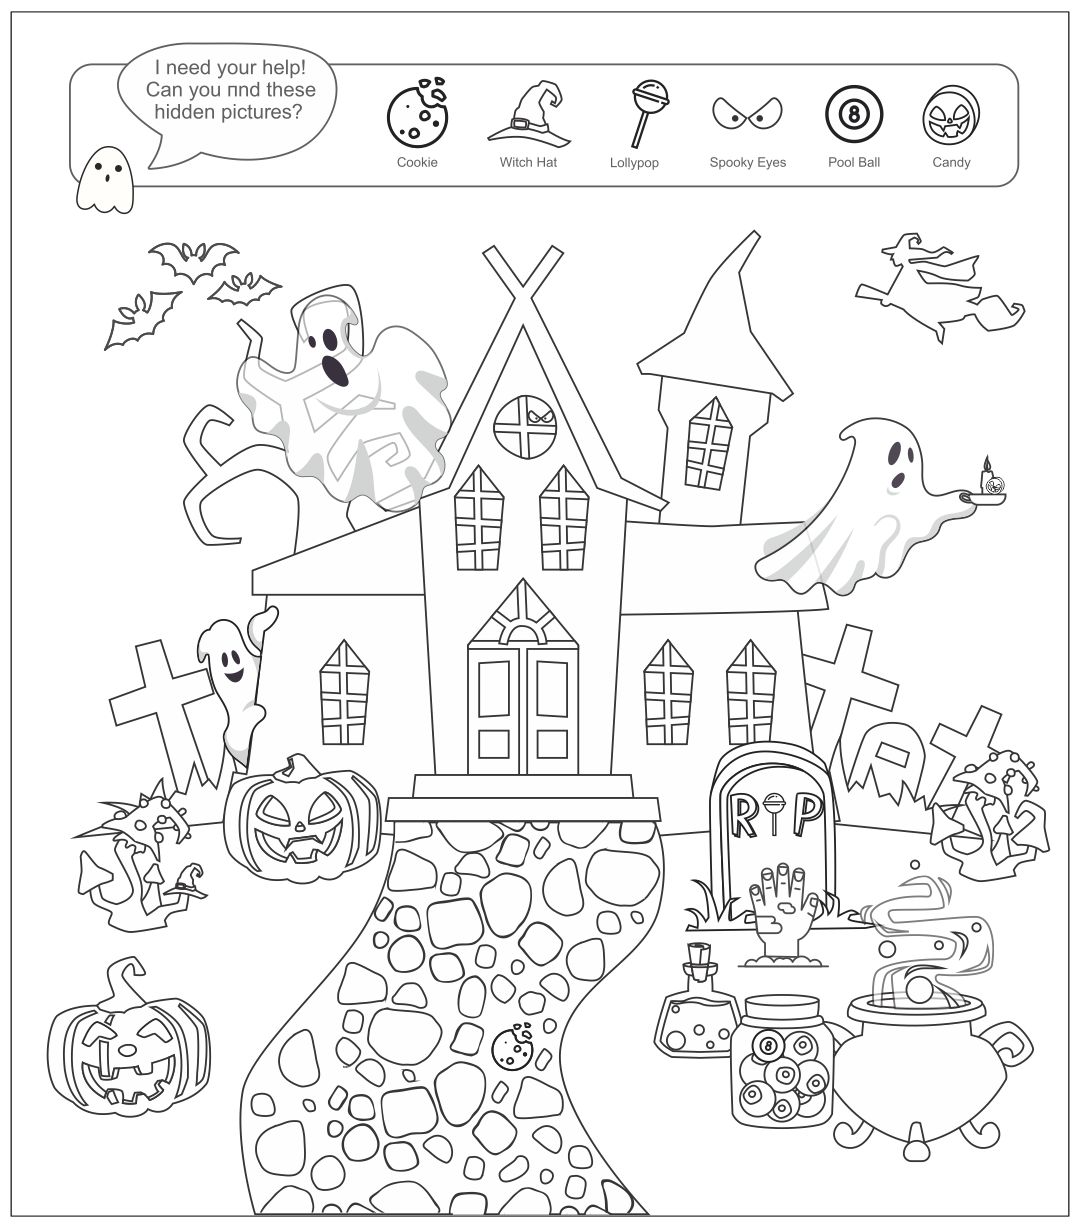 15 Best Halloween Hidden Picture Printable PDF For Free At Printablee